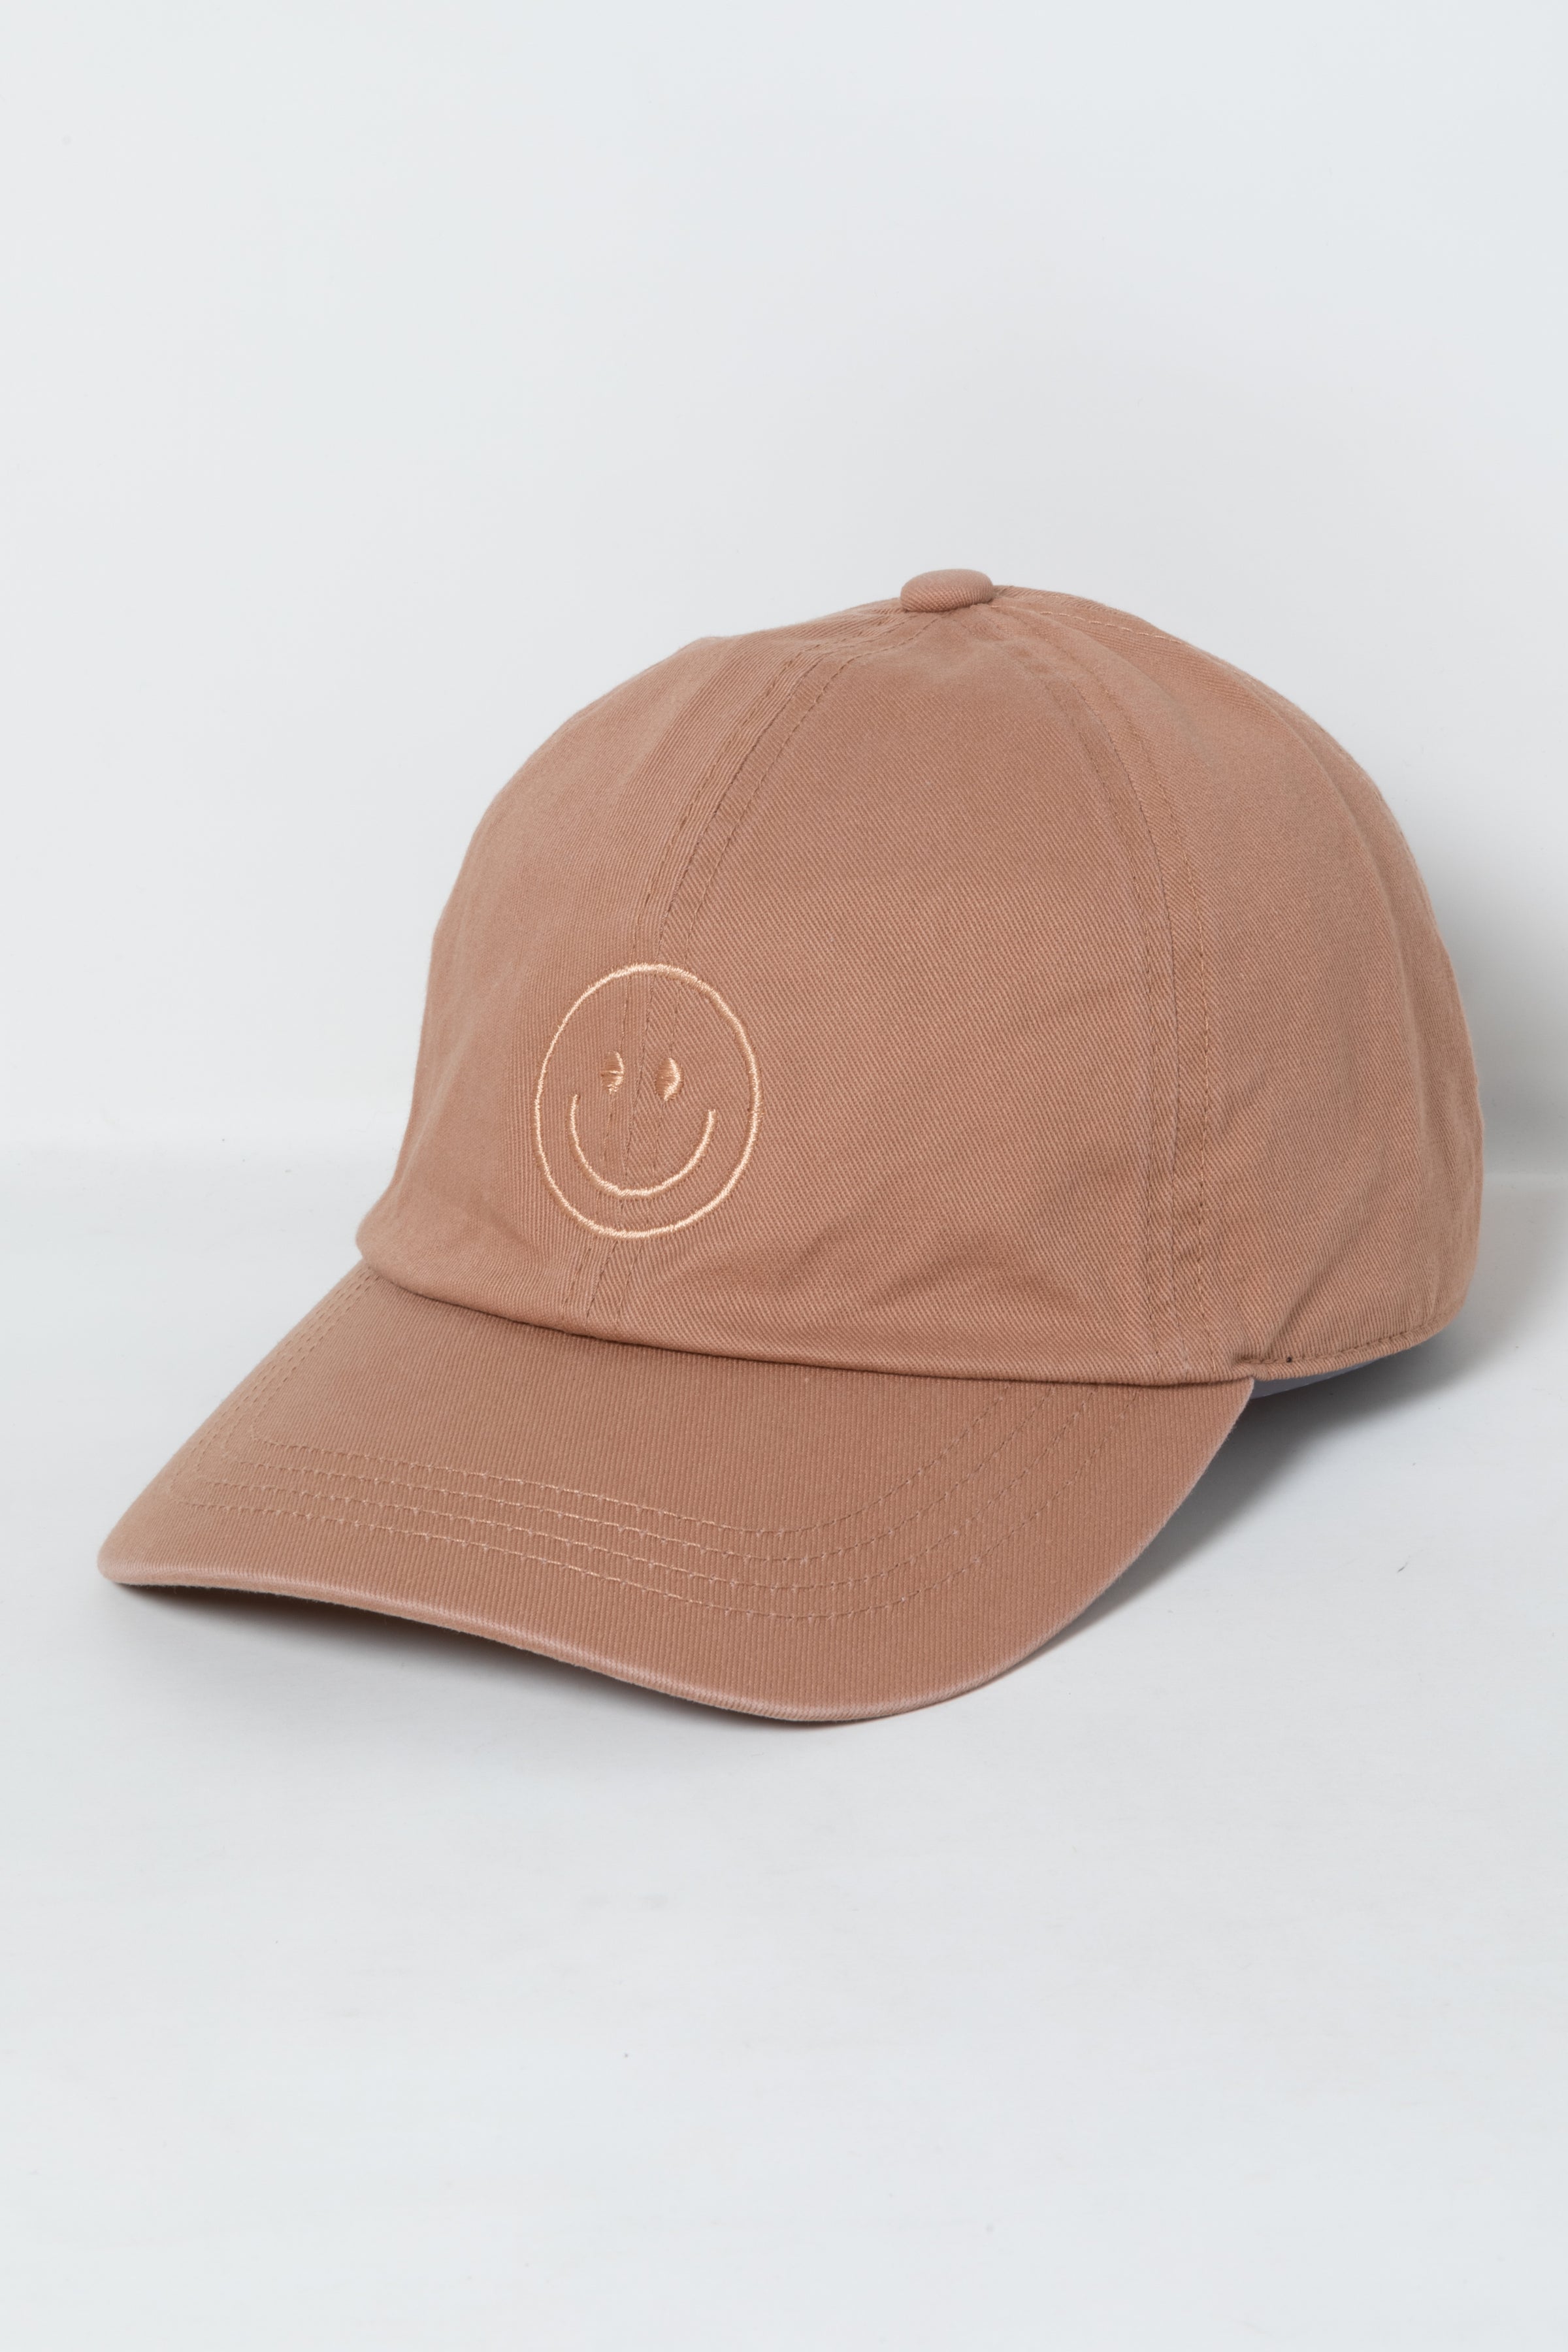 LCAP3004 - Tonal Smile Face Embroidered Washed Baseball Cap